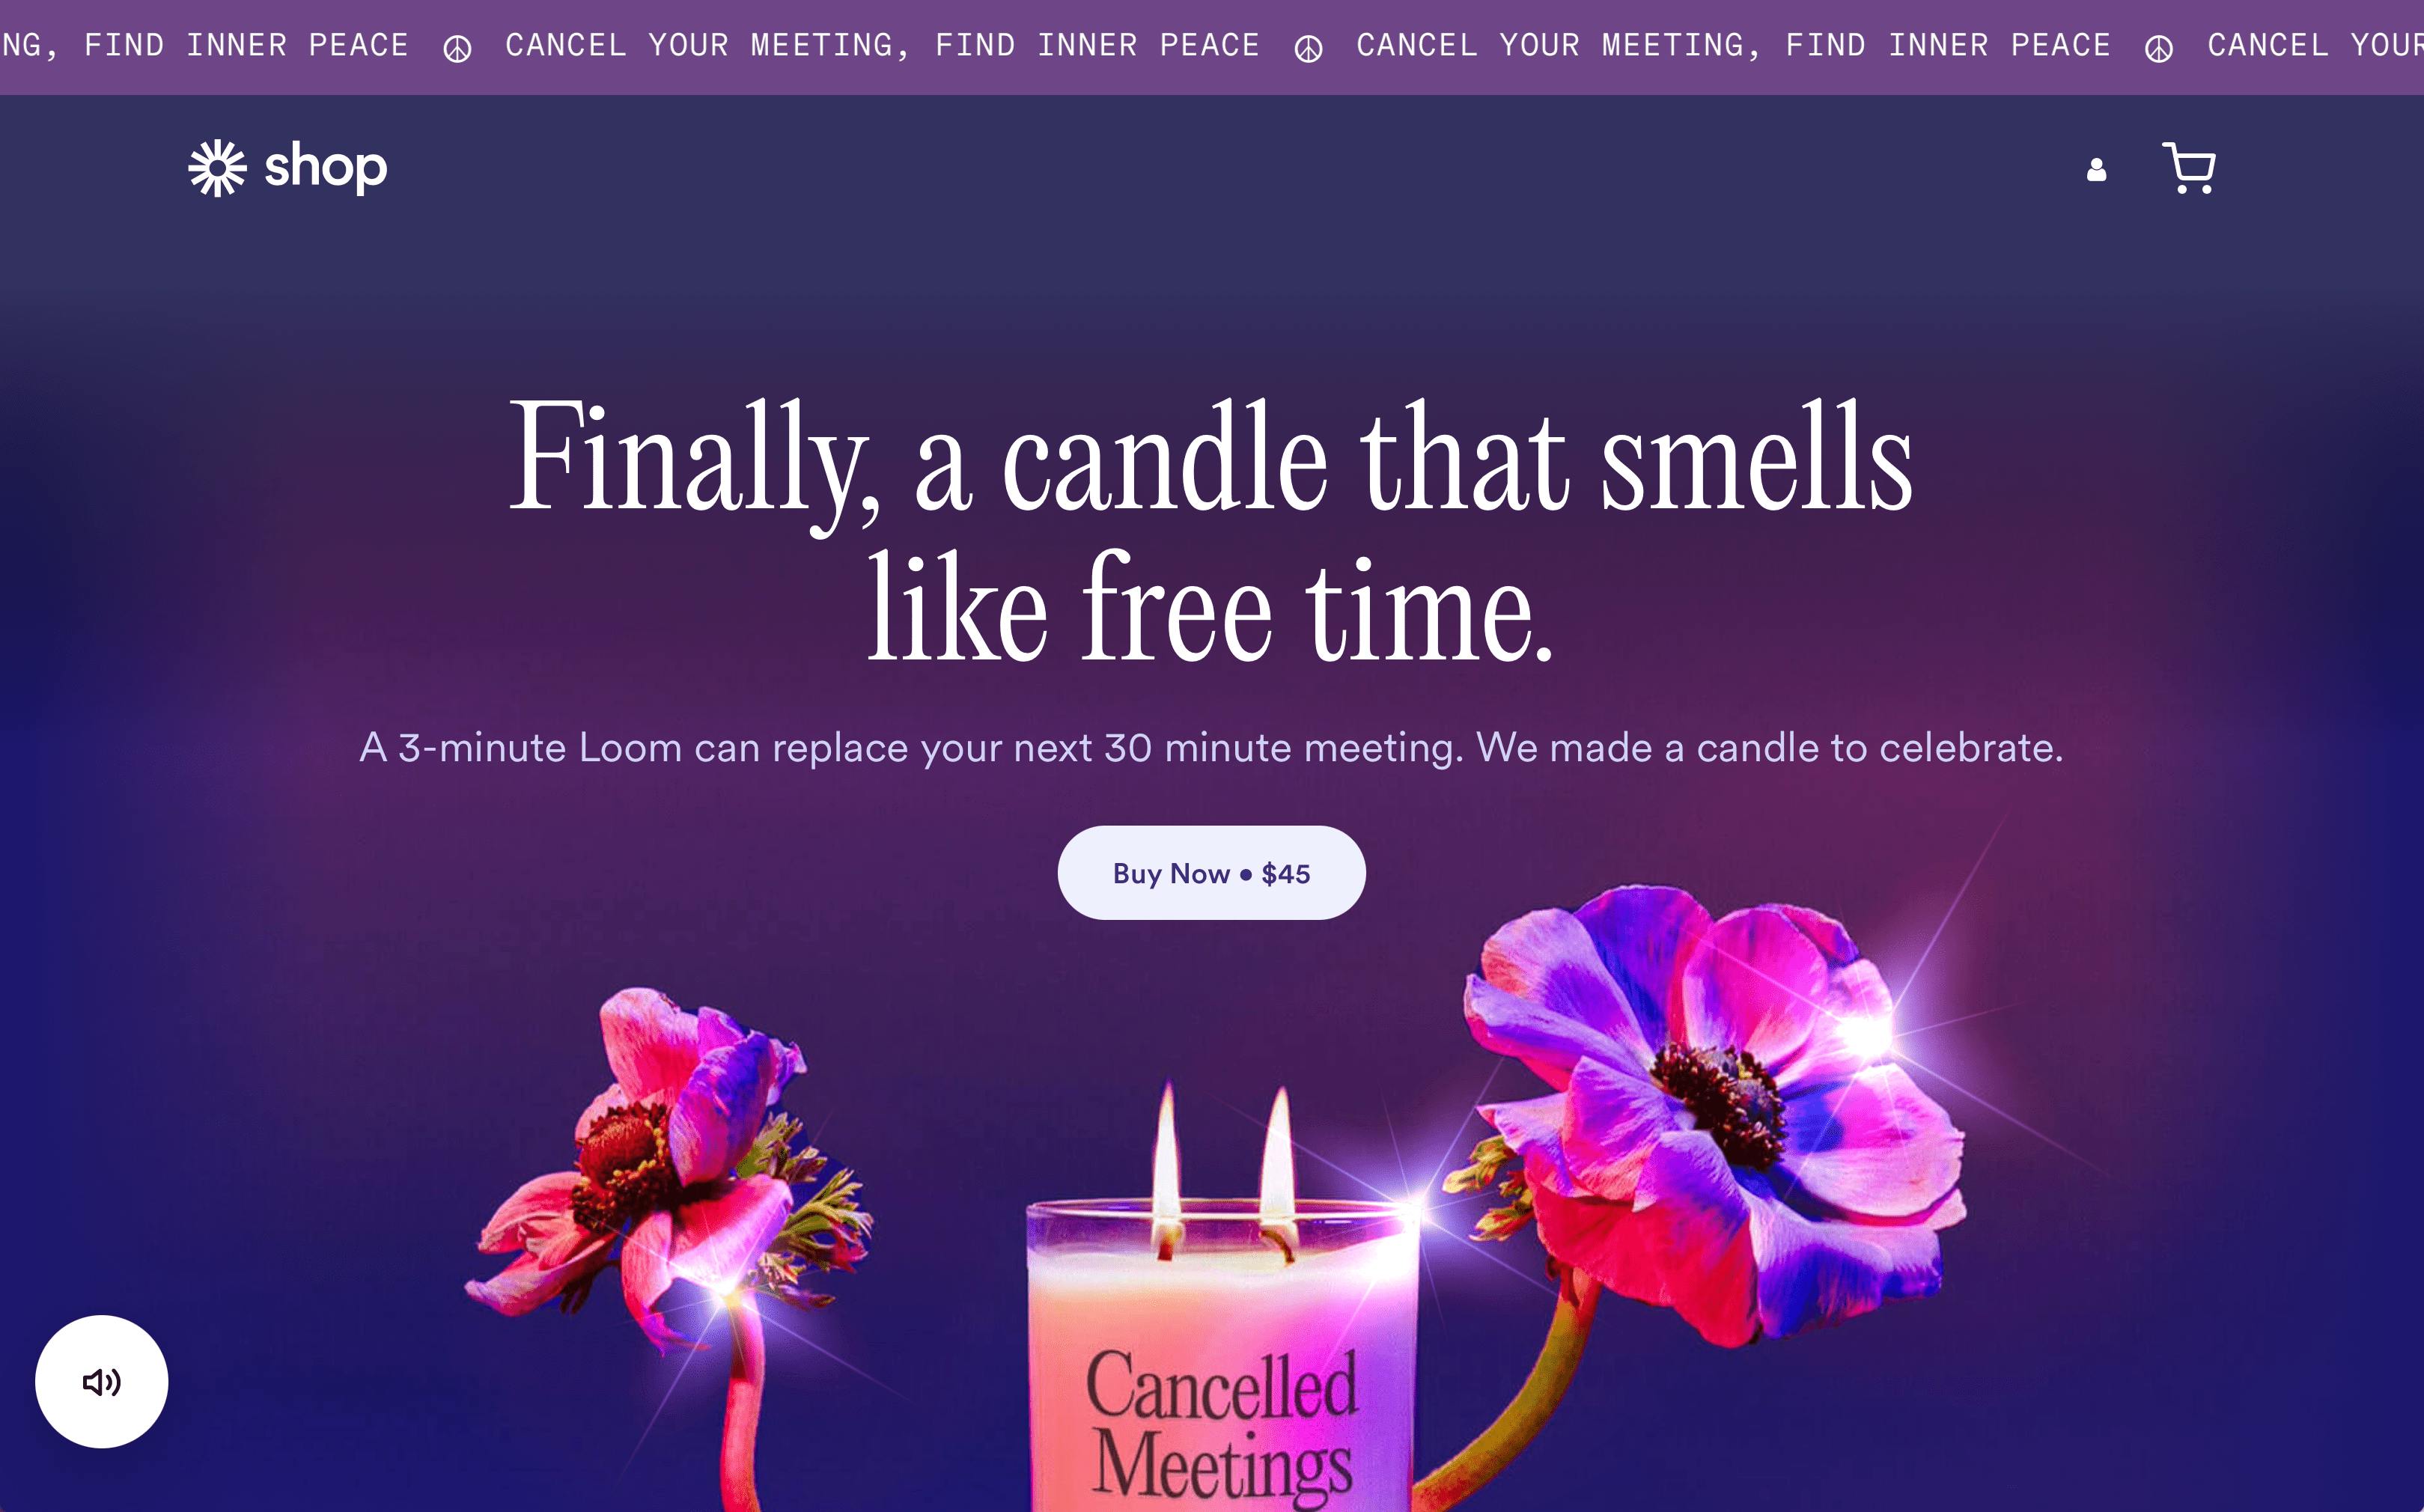 A screenshot of Loom's website. The title reads "Finally, a candle that smells like free time"